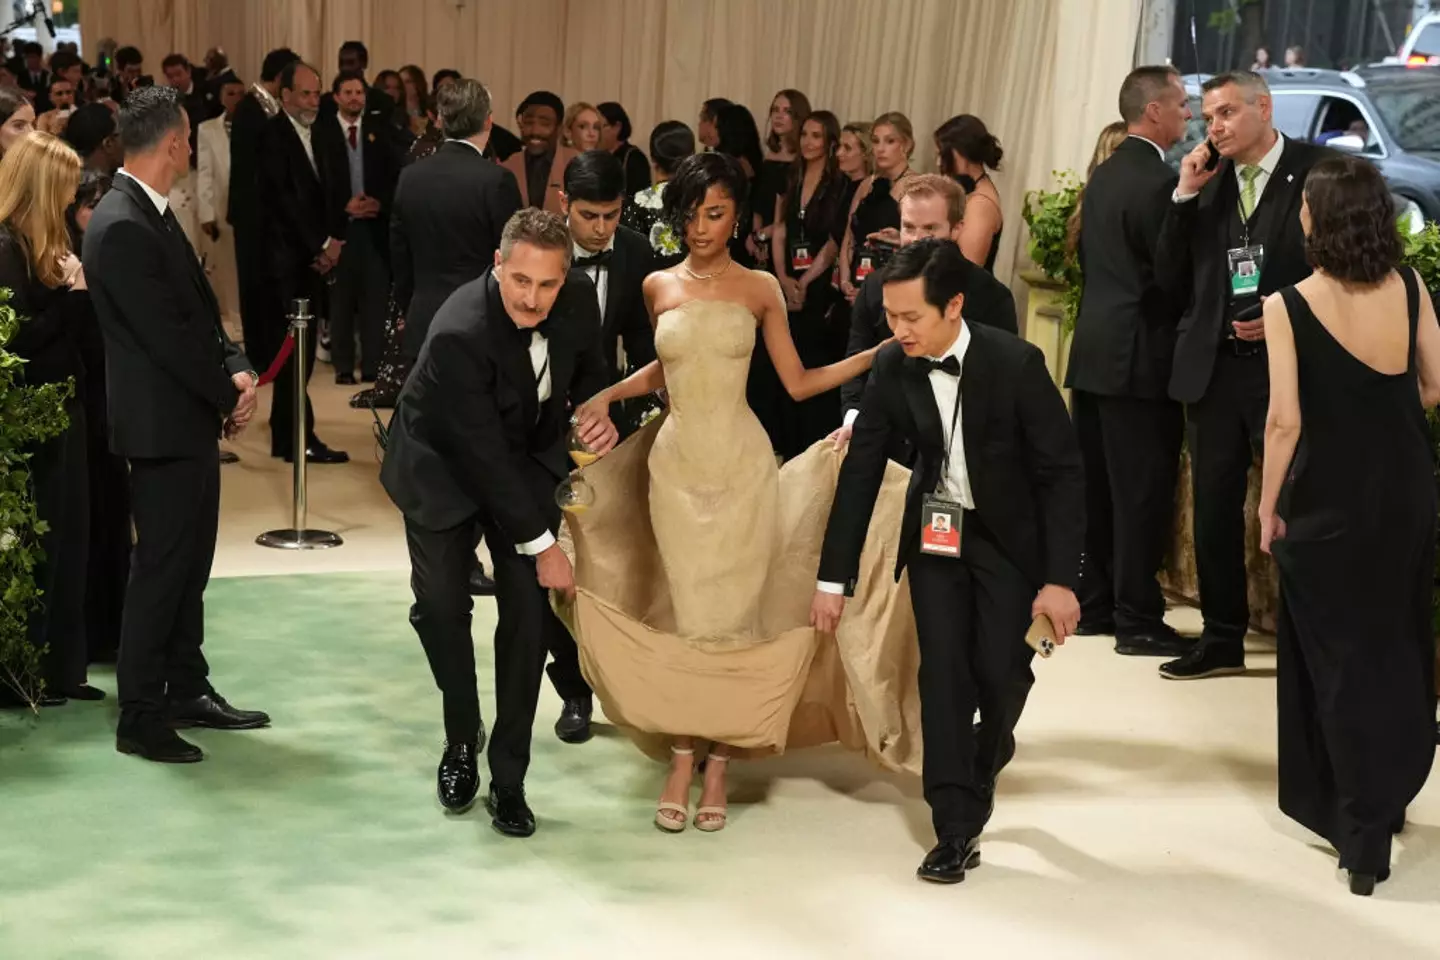 Even though Tyla had help getting up the Met Gala stairs, she looked absolutely amazing doing it. (Sean Zanni/Patrick McMullan via Getty Images)